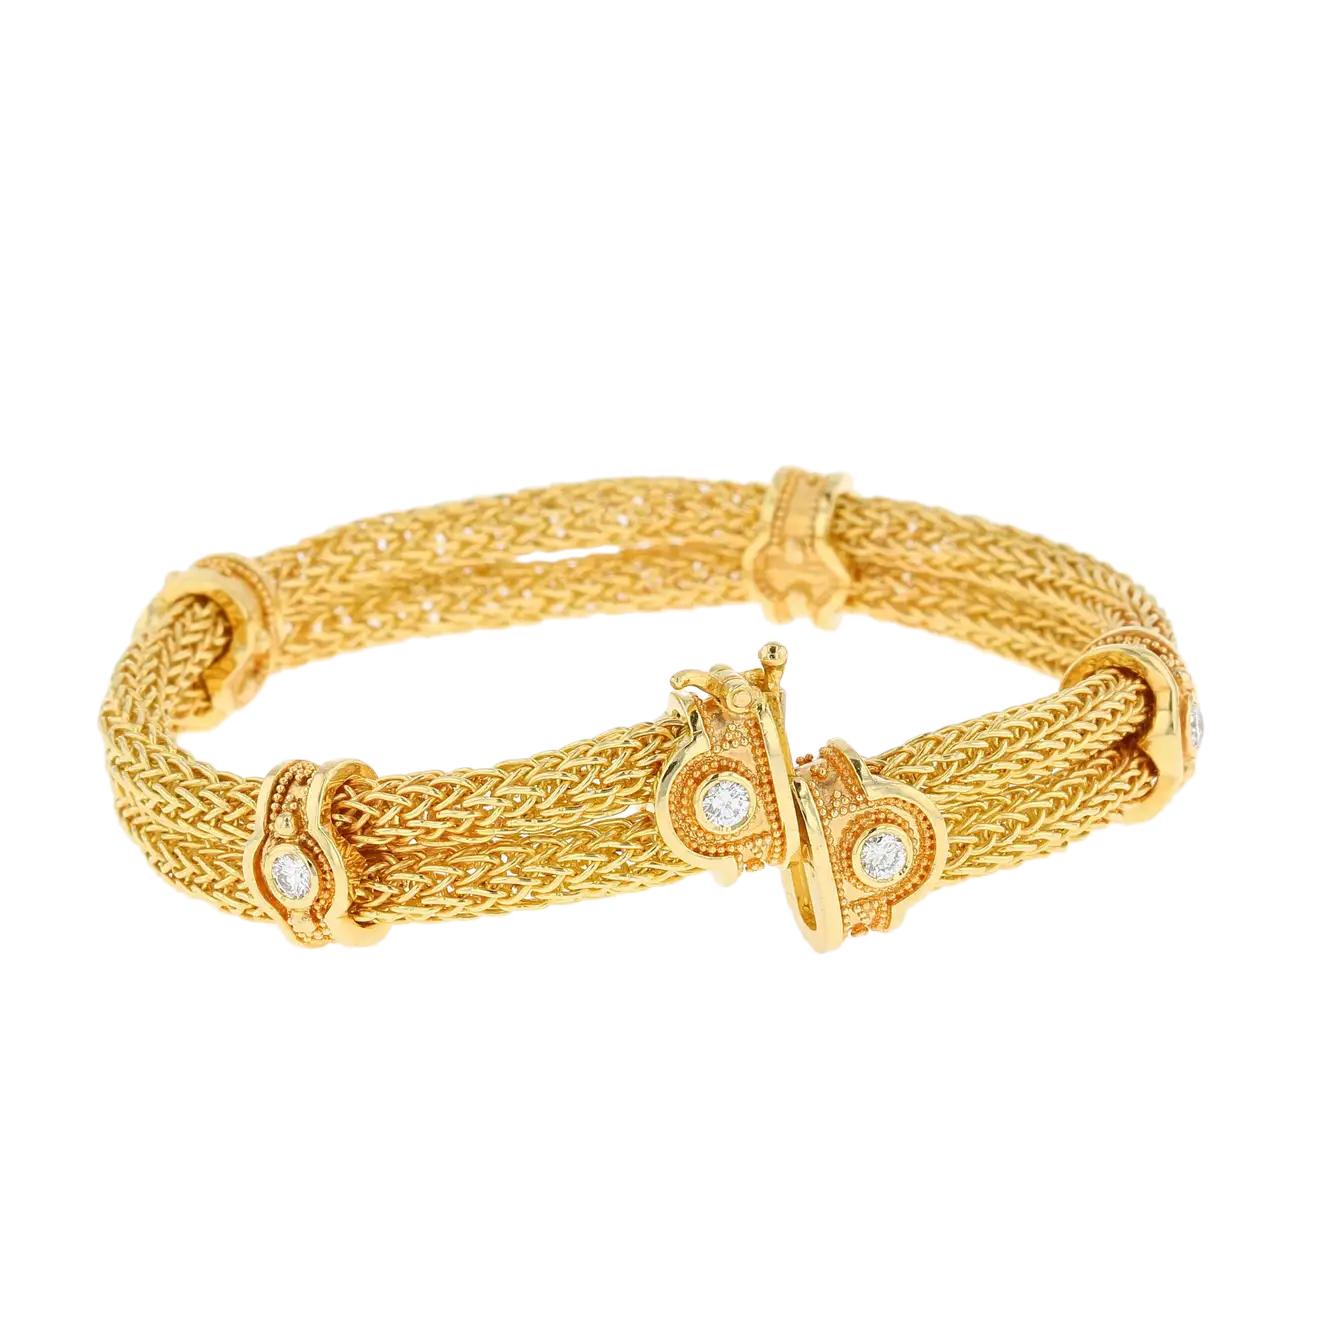 Contemporary Kent Raible Double Woven Chain Bracelet with Diamonds and Gold Granulation For Sale